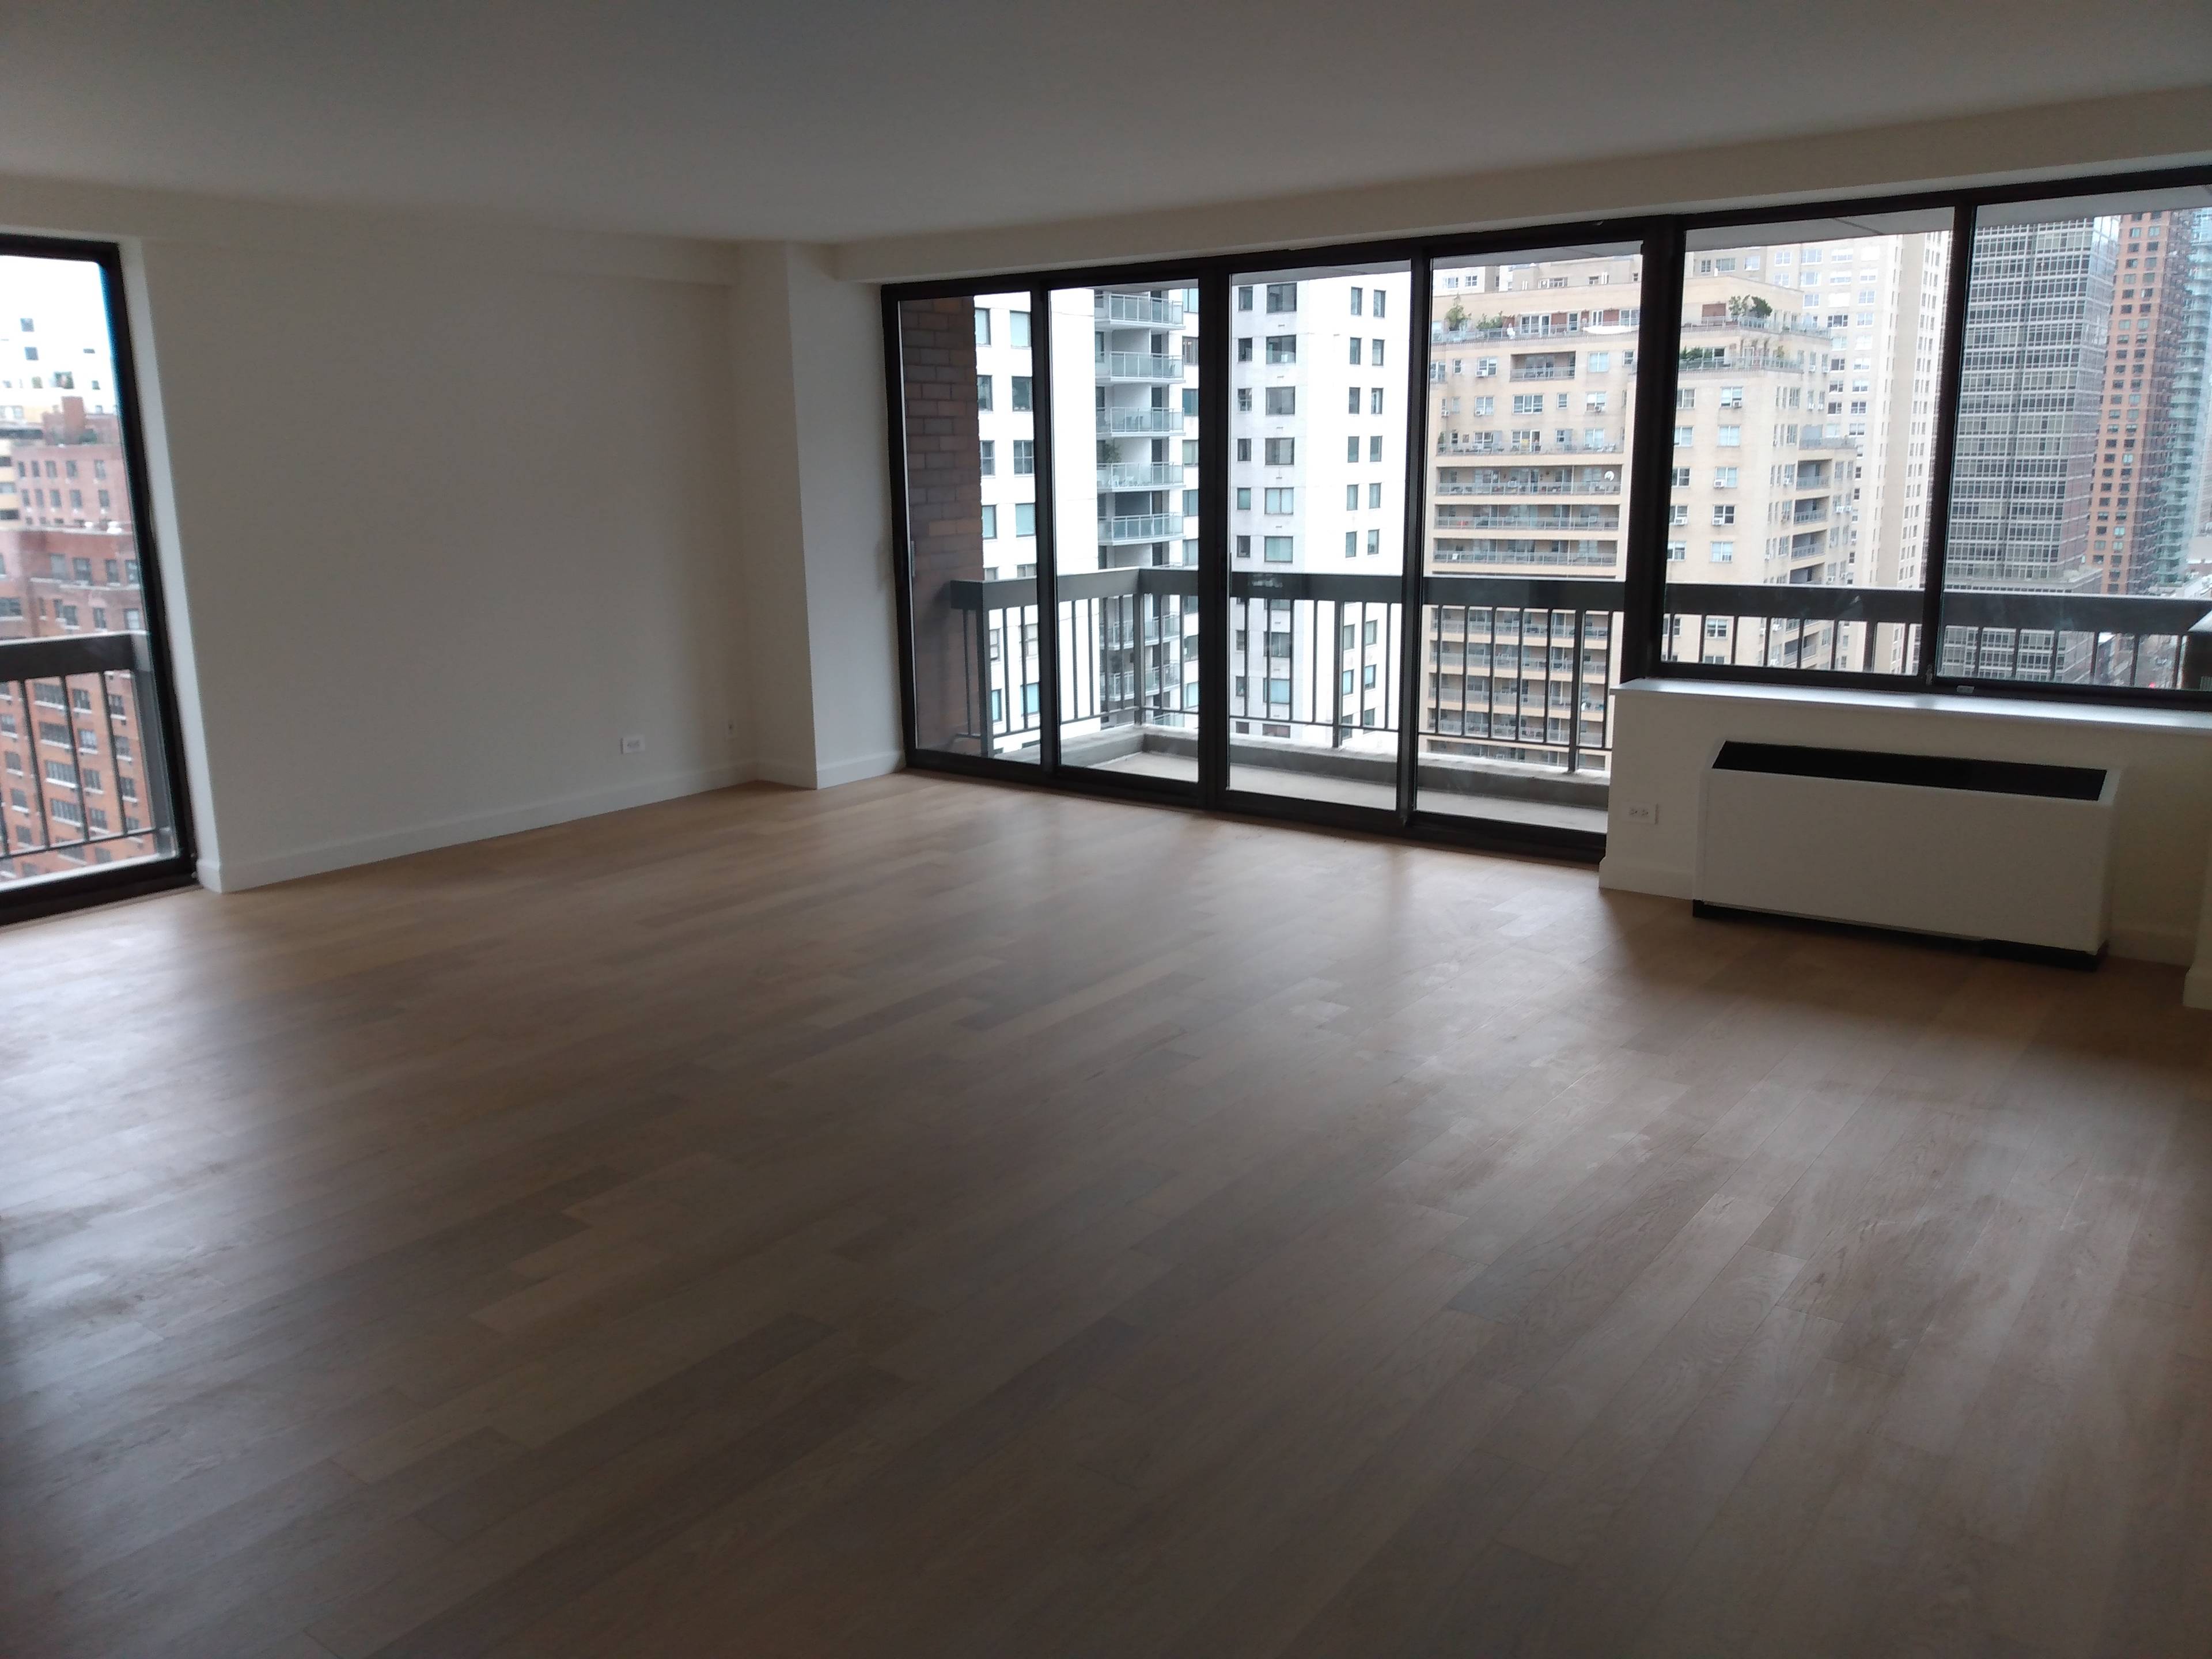 Midtown East Massive 2 Bedroom 2 Baths, Full Service Luxury Building, New Renovation, WIC, W/D, Custom Bathrooms, High End Chef's Kitchen, Large Terrace, No Fee